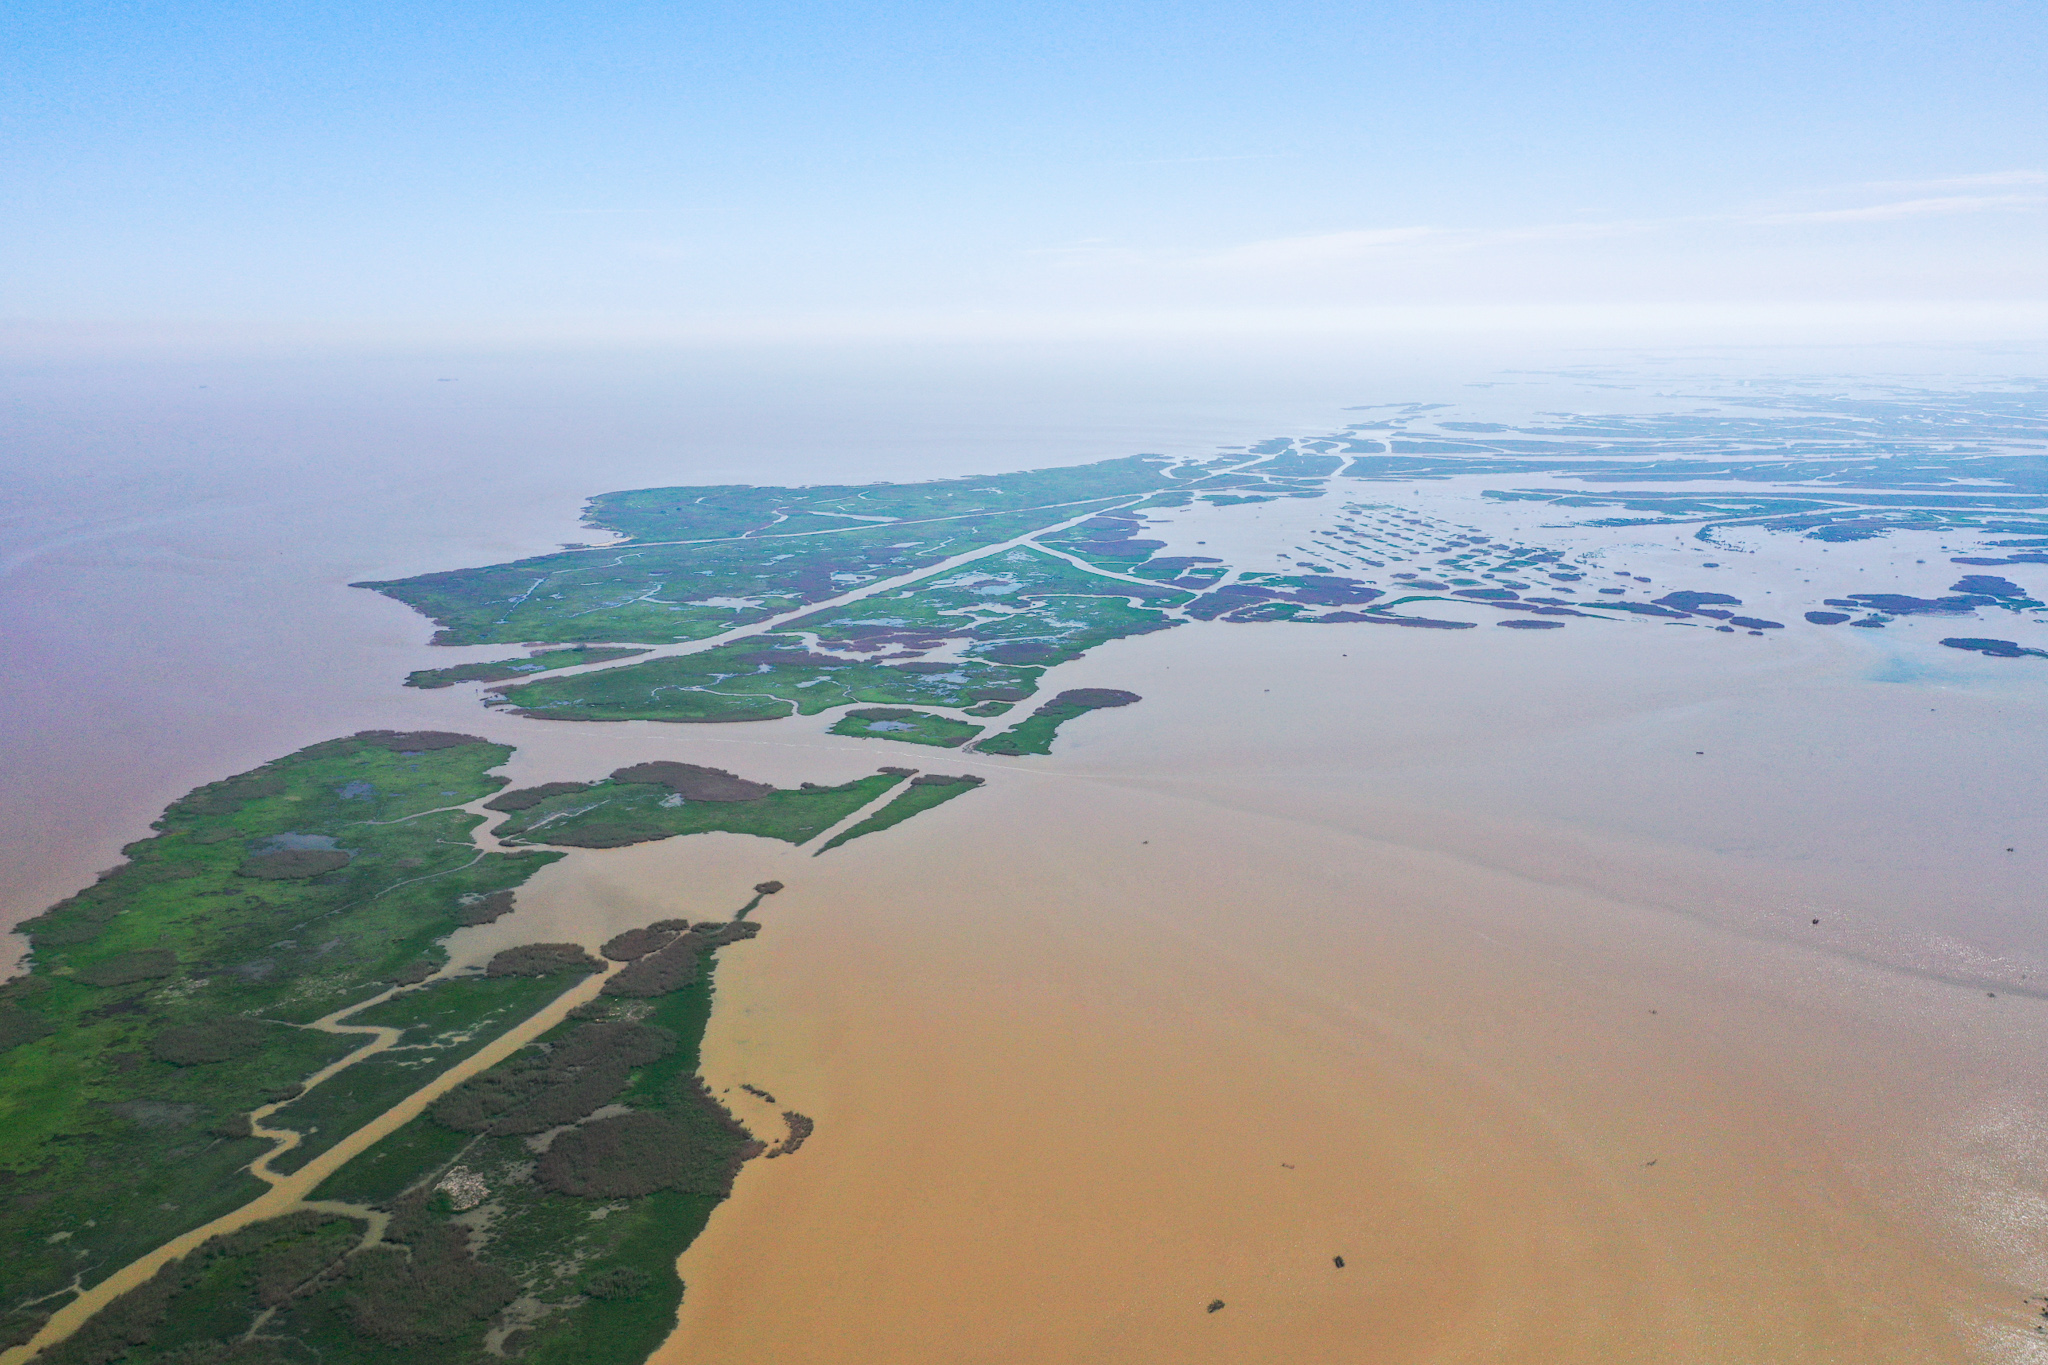 Aerial view over Bay Denesse, looking out towards the Gulf of Mexico